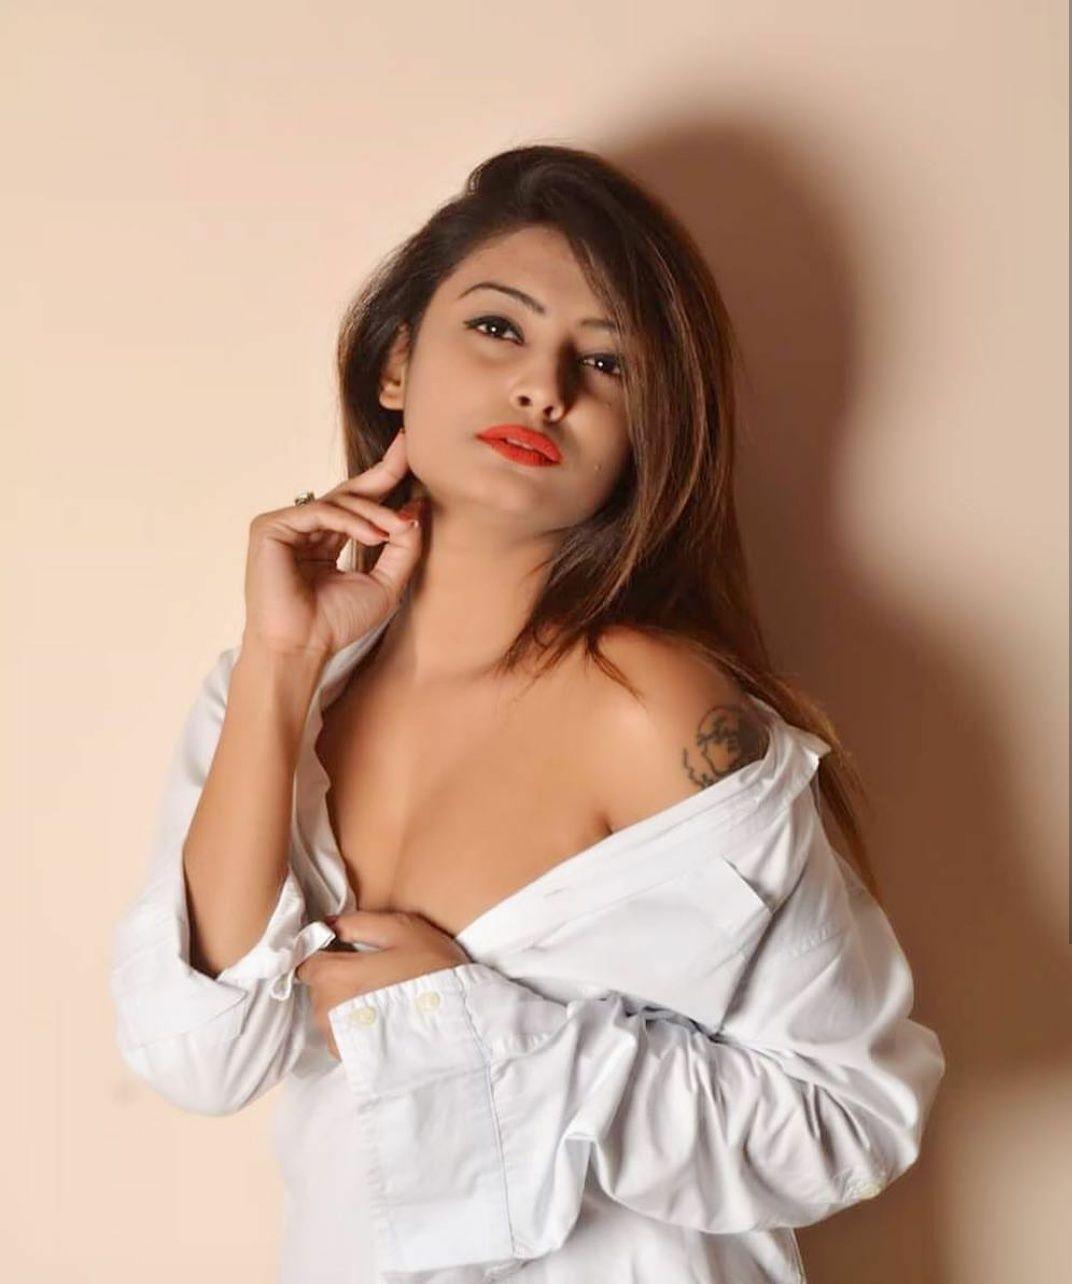 Super Hot Indian Model Twinkle Kapoor Hot Cleavage Show Clicks